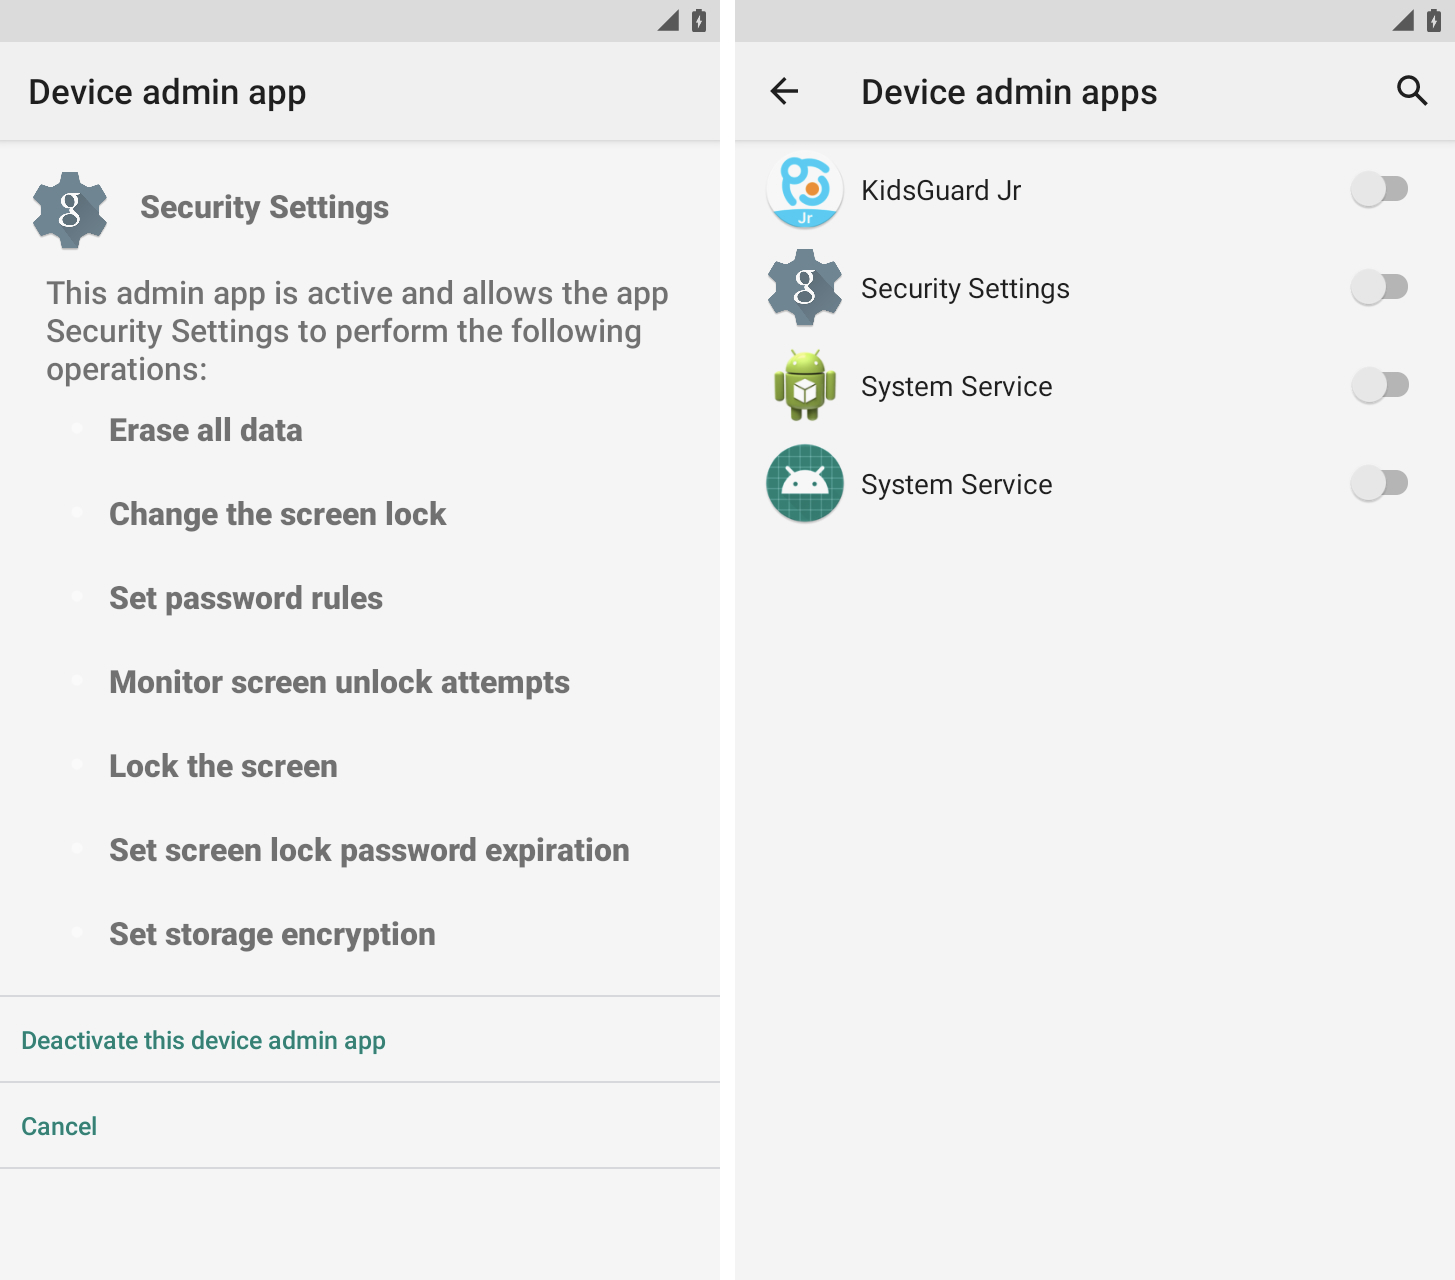 Two screenshots side-by-side, with one showing a dodgy-looking "Security Settings" app with full admin control over the Android device in question, allowing it to "erase all data" and "lock the screen." The second screenshot shows the currently installed device admin apps as all showing as switched off.